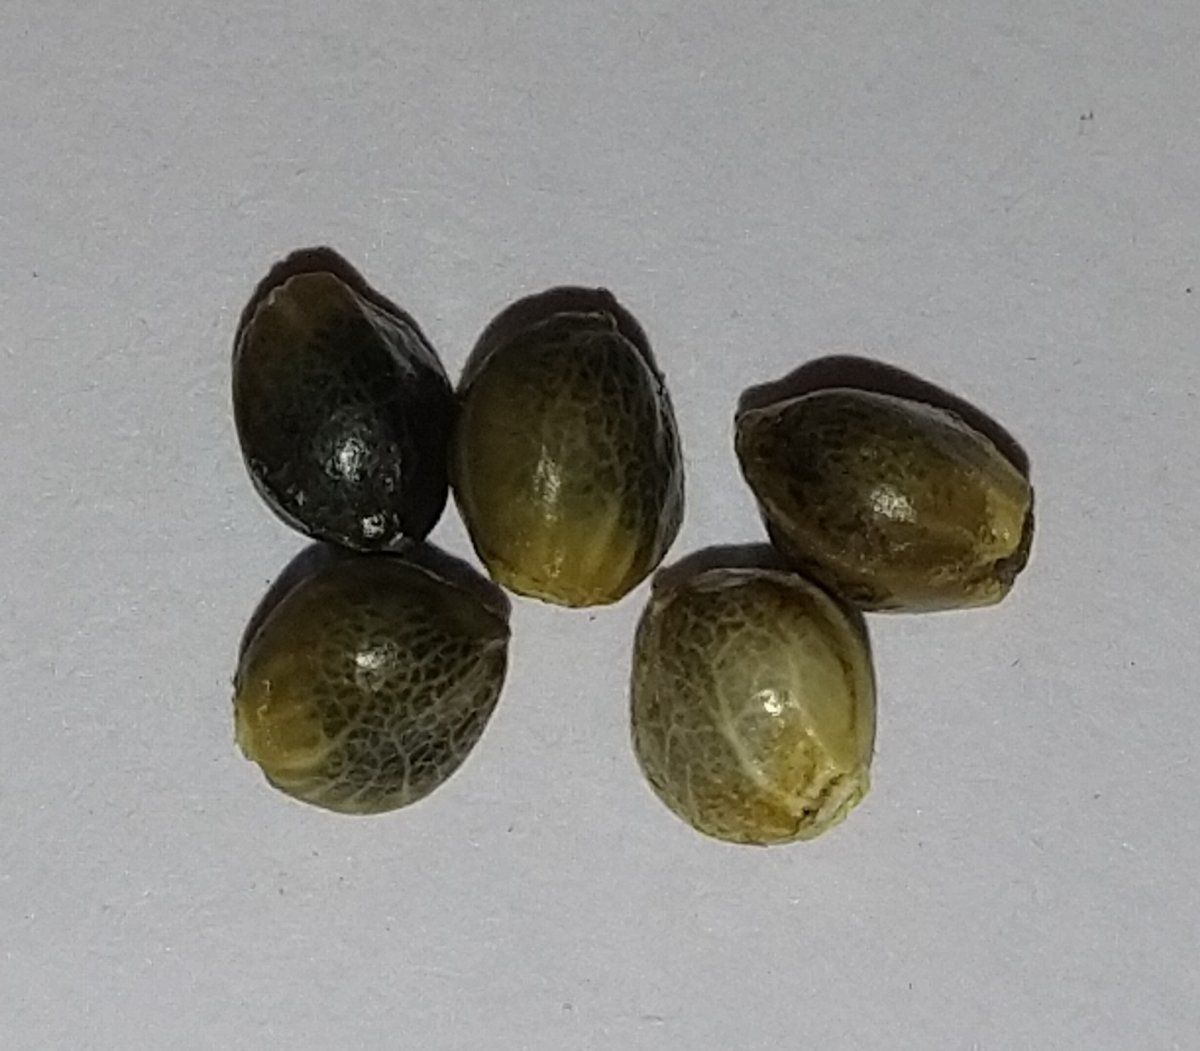 Autoflower seeds from feminized non hermaphroditic or pollinated plant